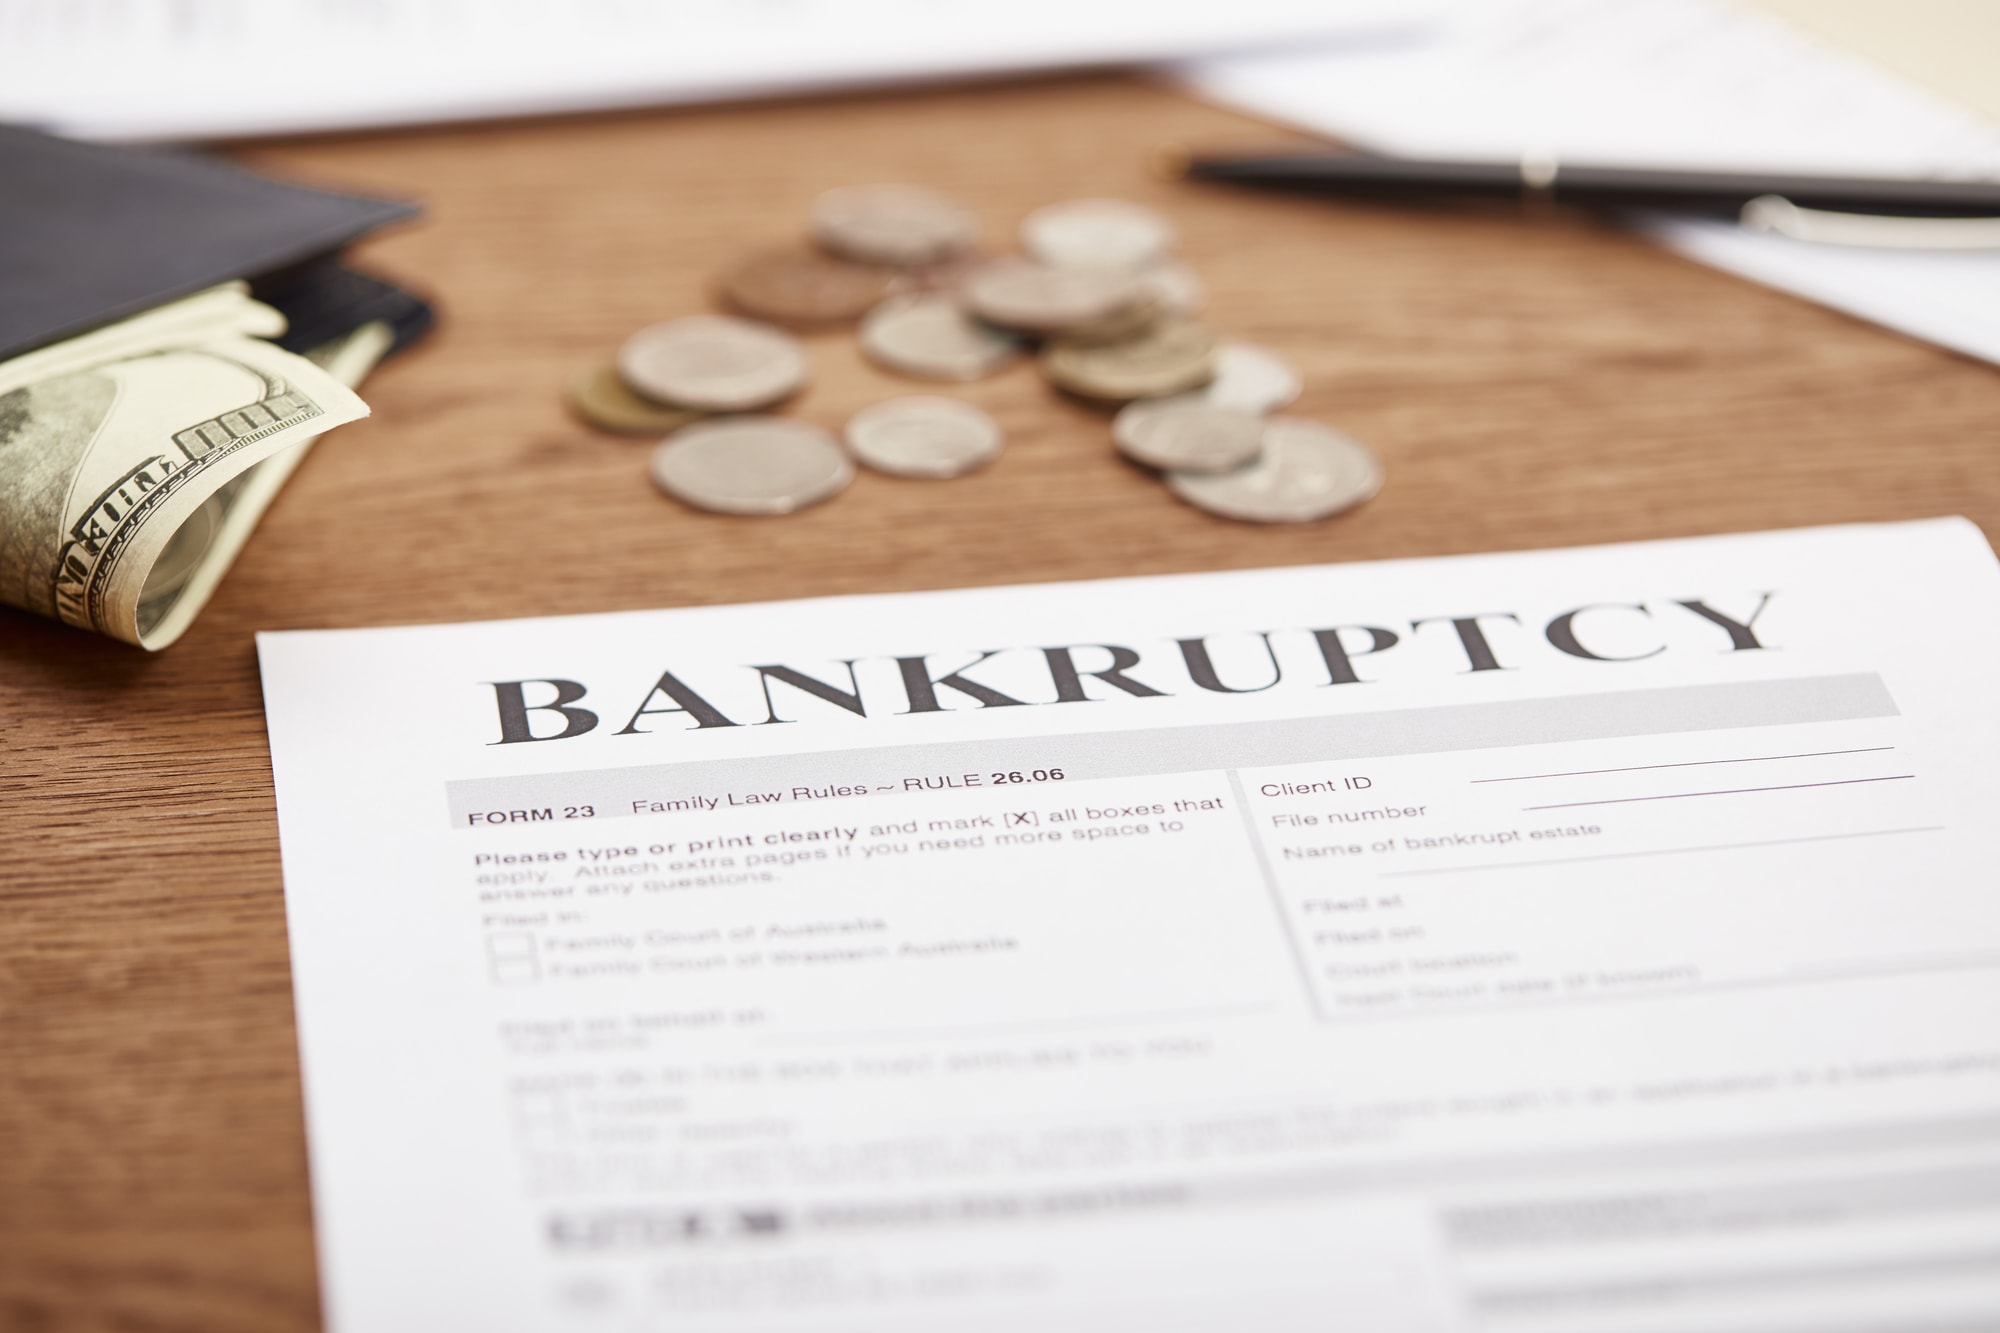 Bankruptcy Forms and moeny on a table